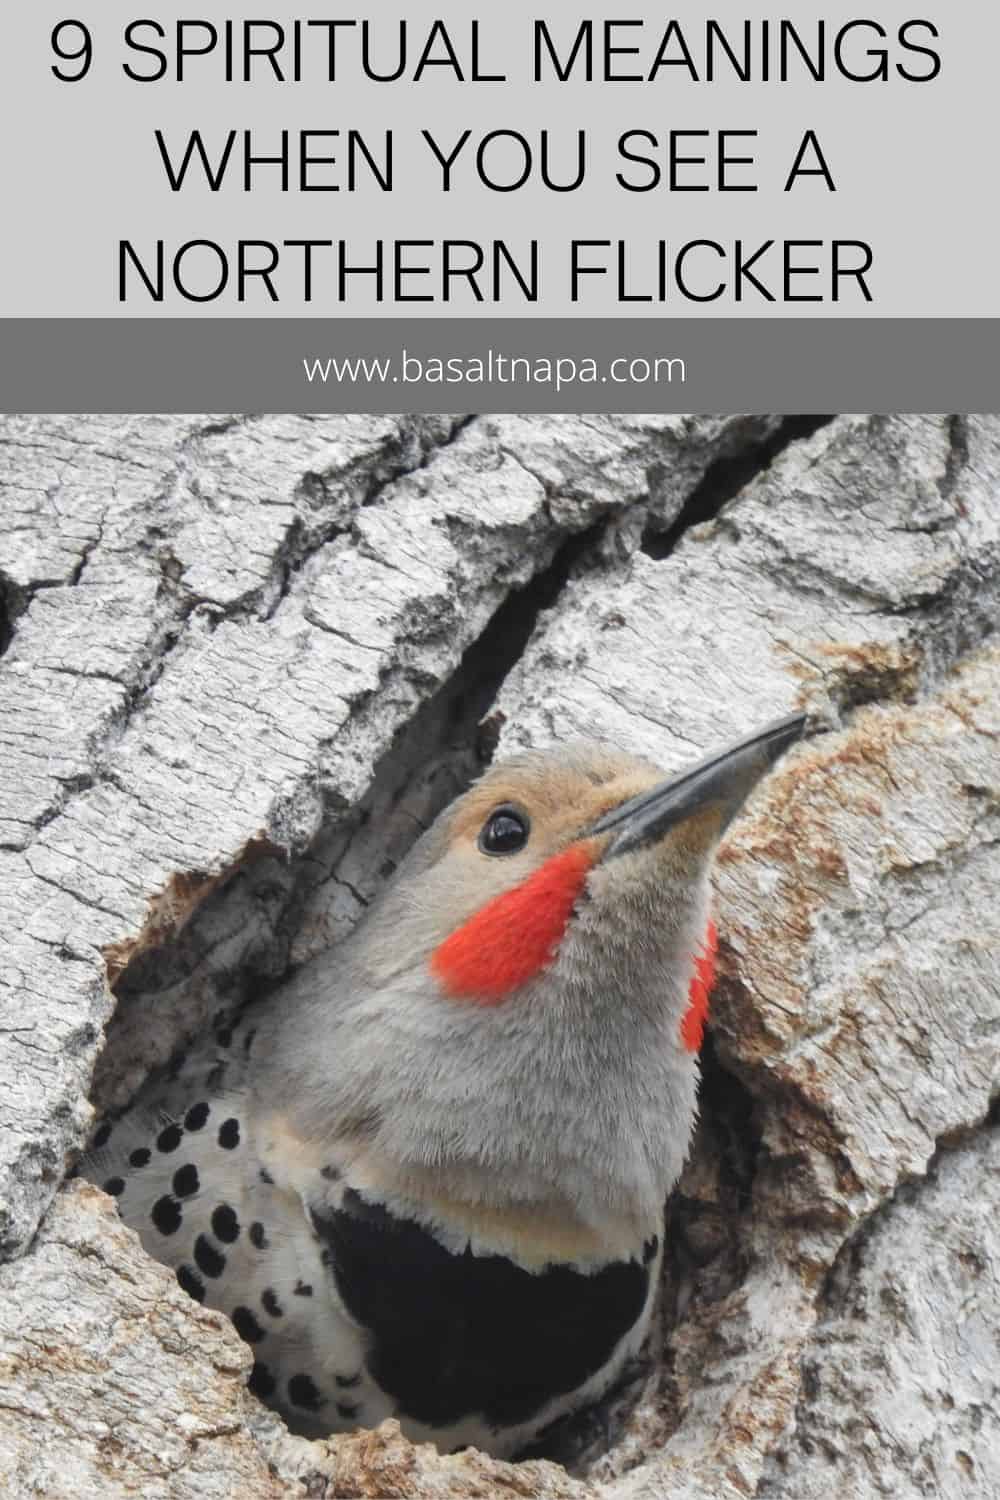 9 Spiritual Meanings When You See A Northern Flicker